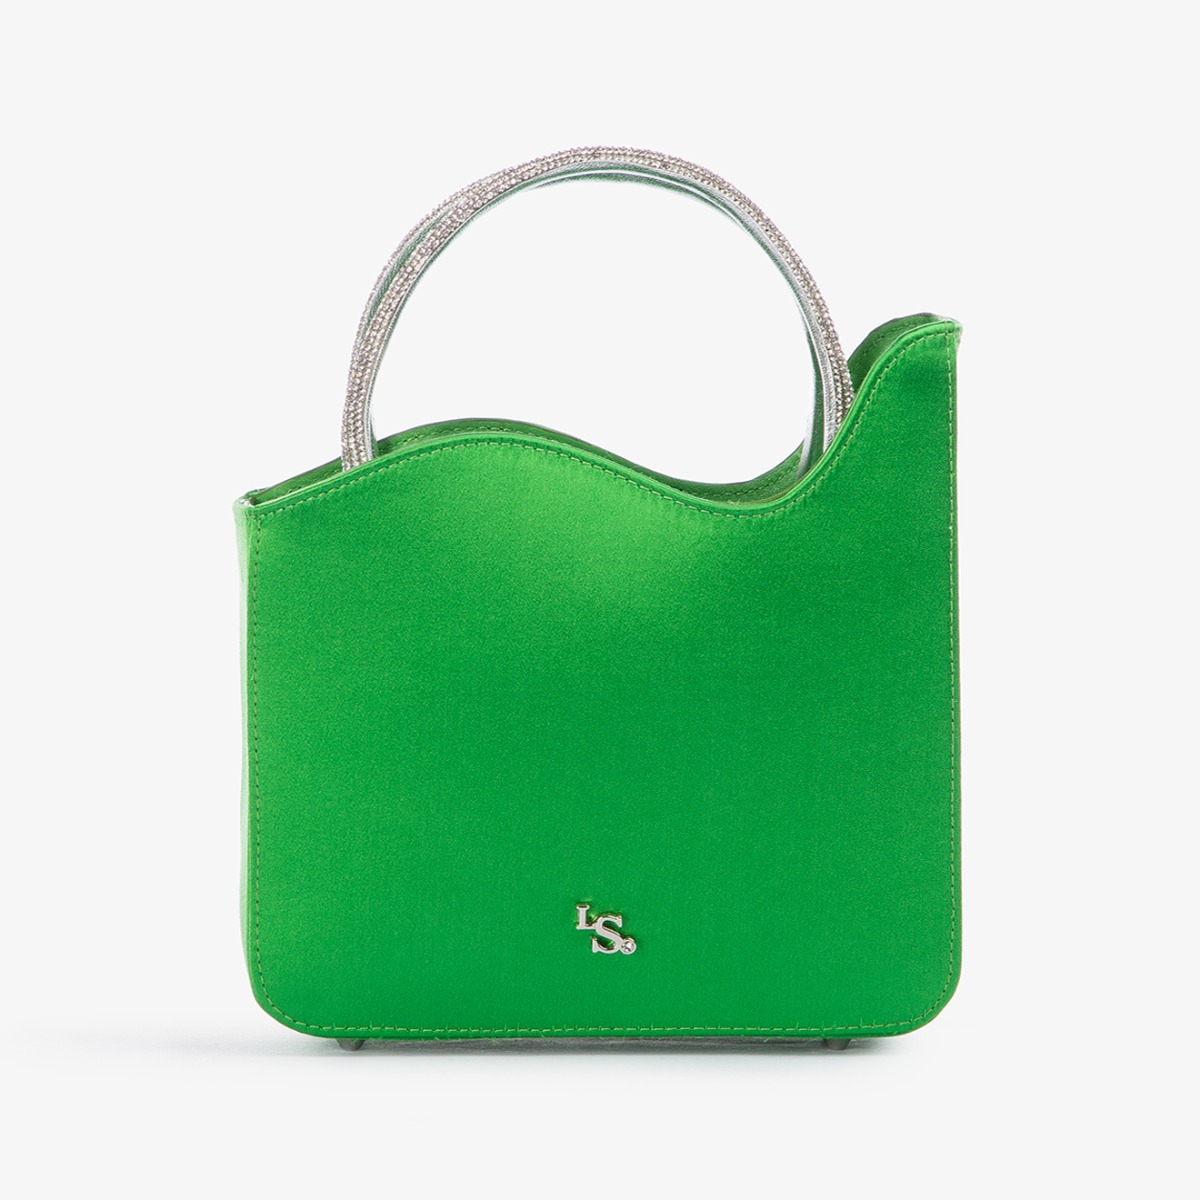 IVY SMALL BAG - Le Silla official outlet